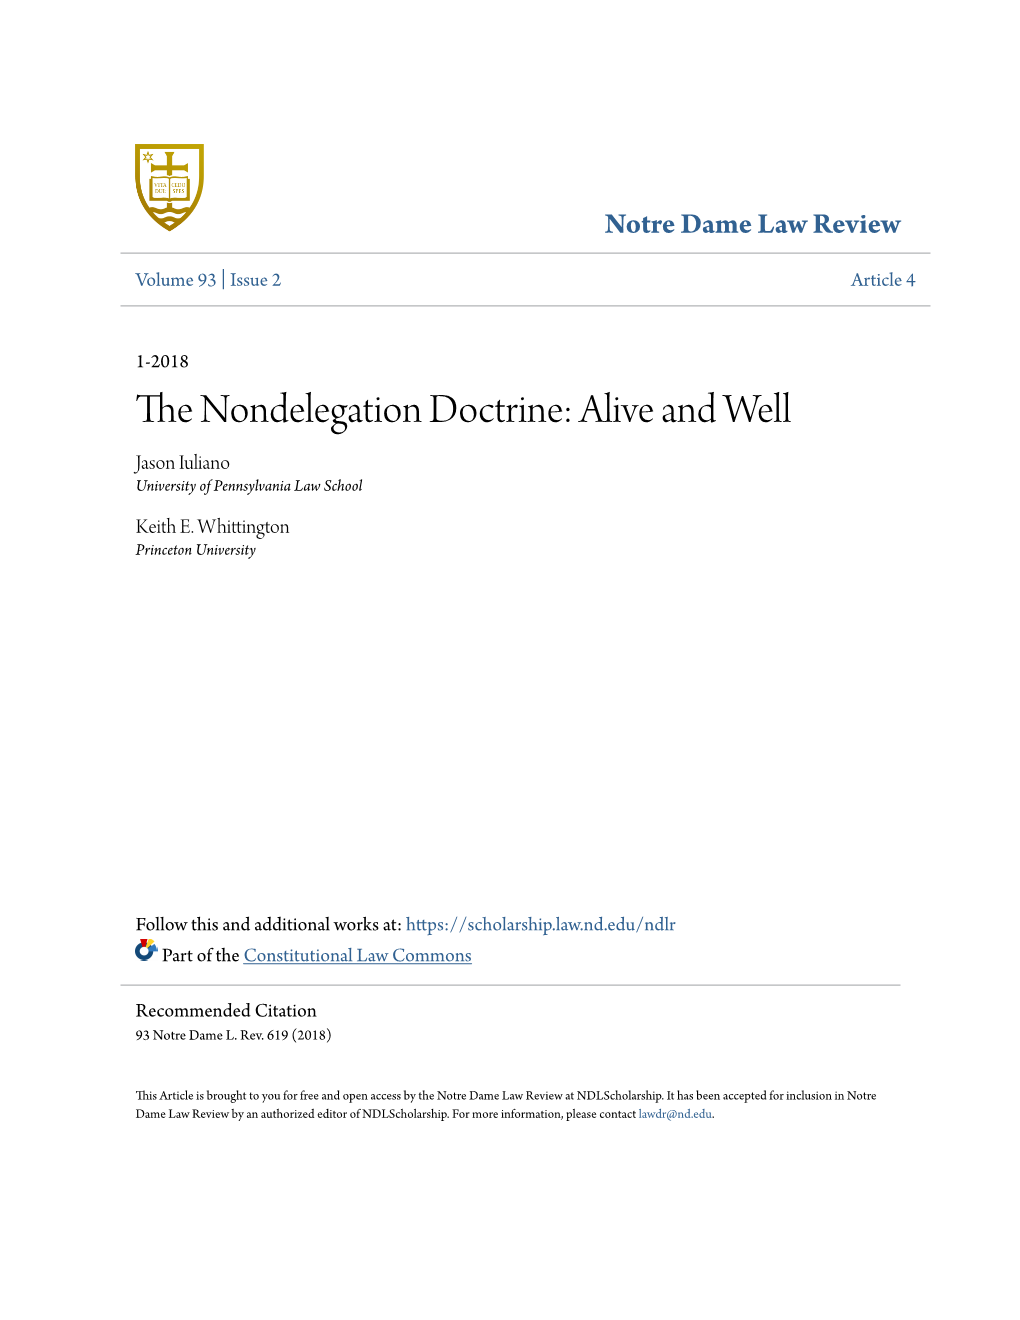 The Nondelegation Doctrine: Alive and Well